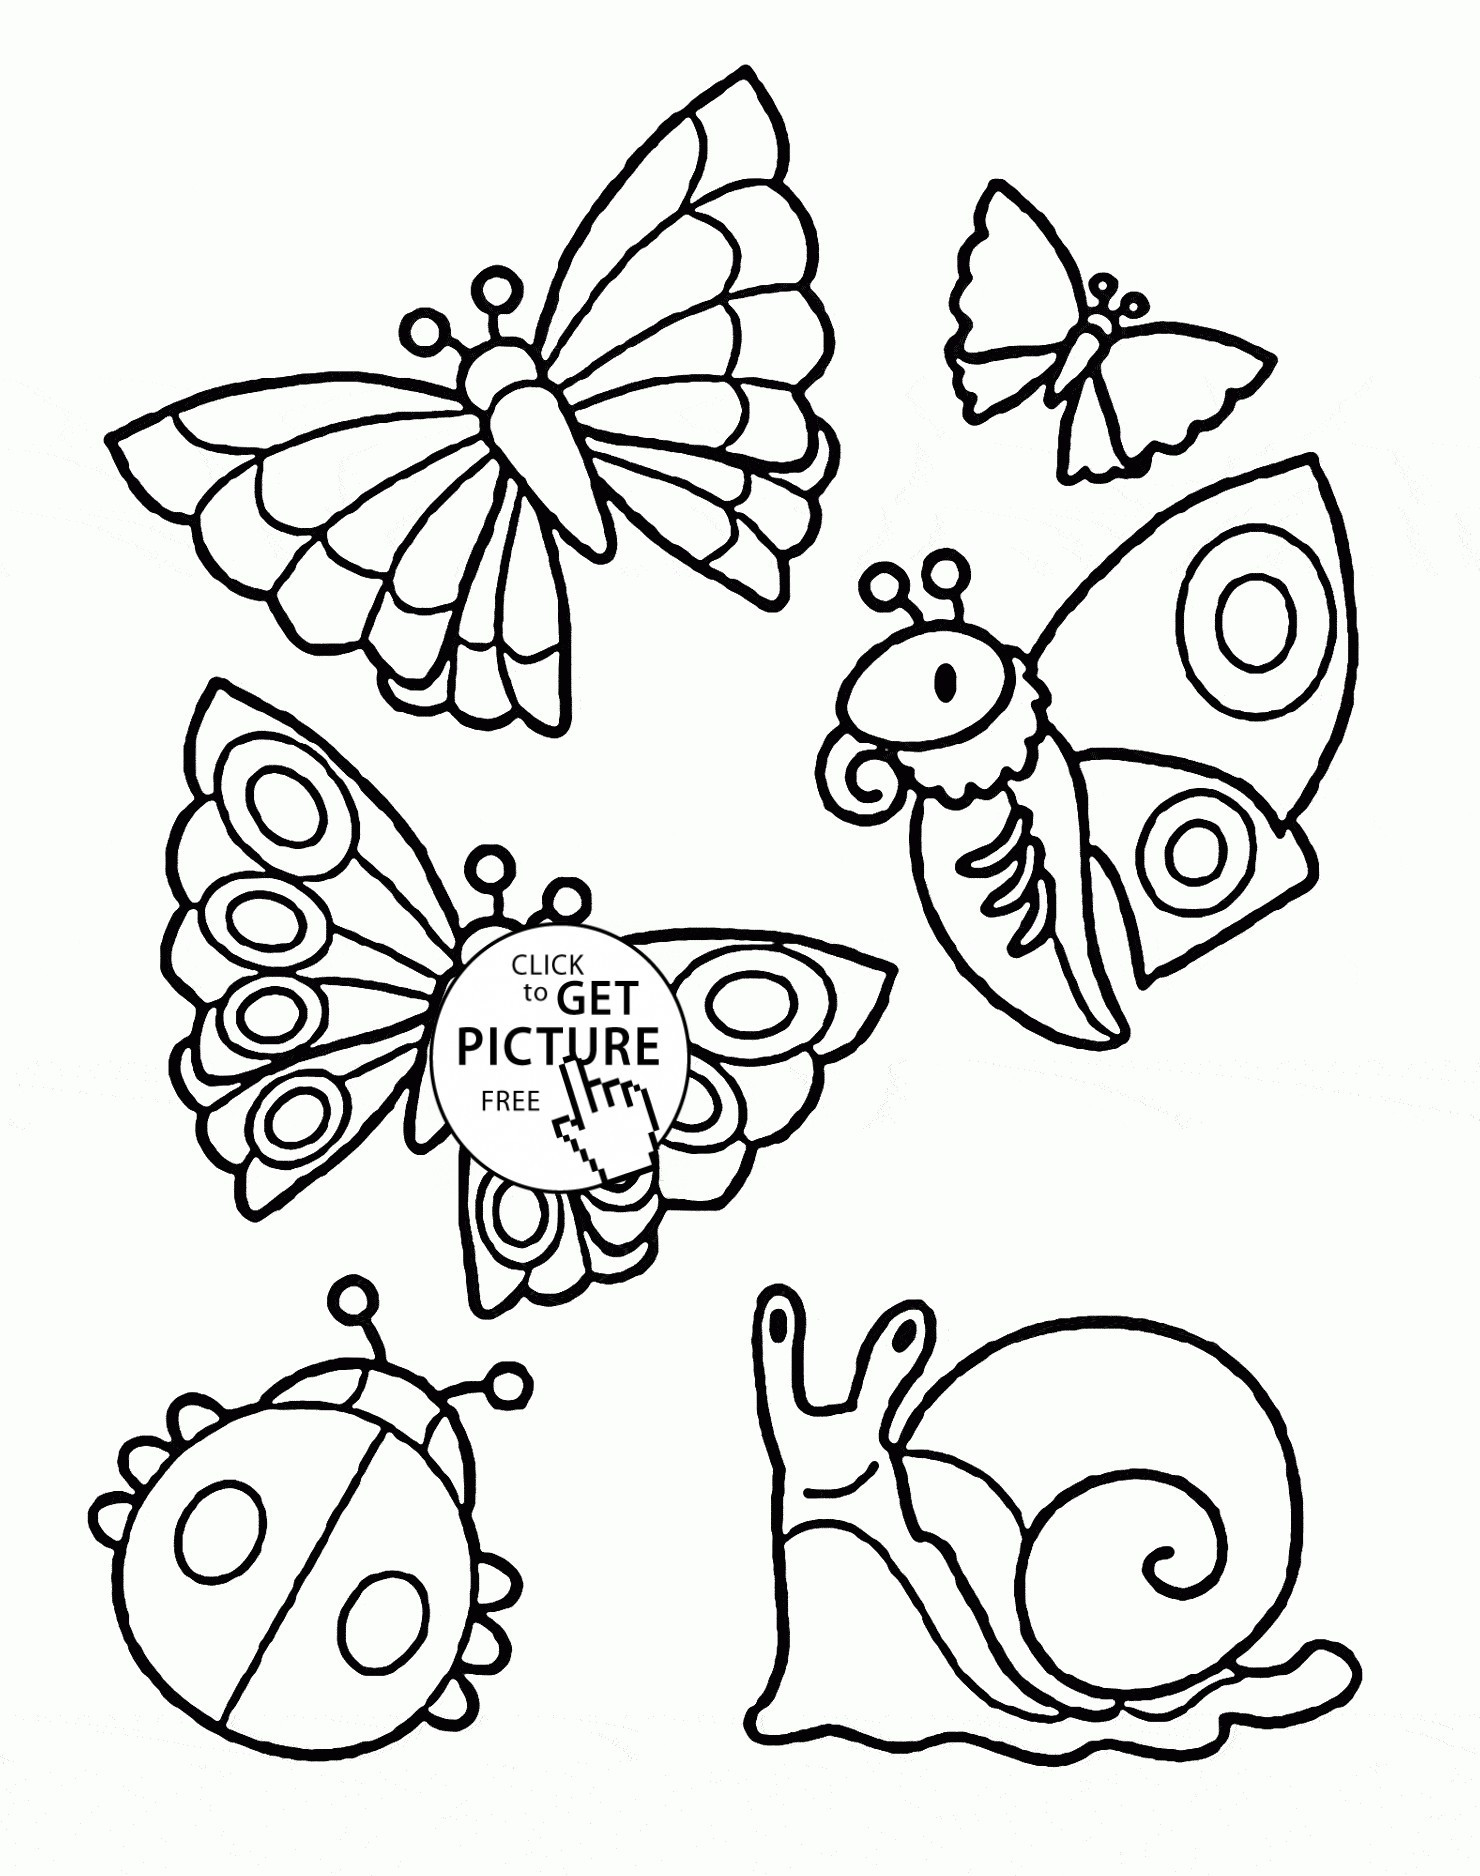 Coloring Pages : Valuable Free Printable Summer Coloring Pages - Free Printable Summer Coloring Pages